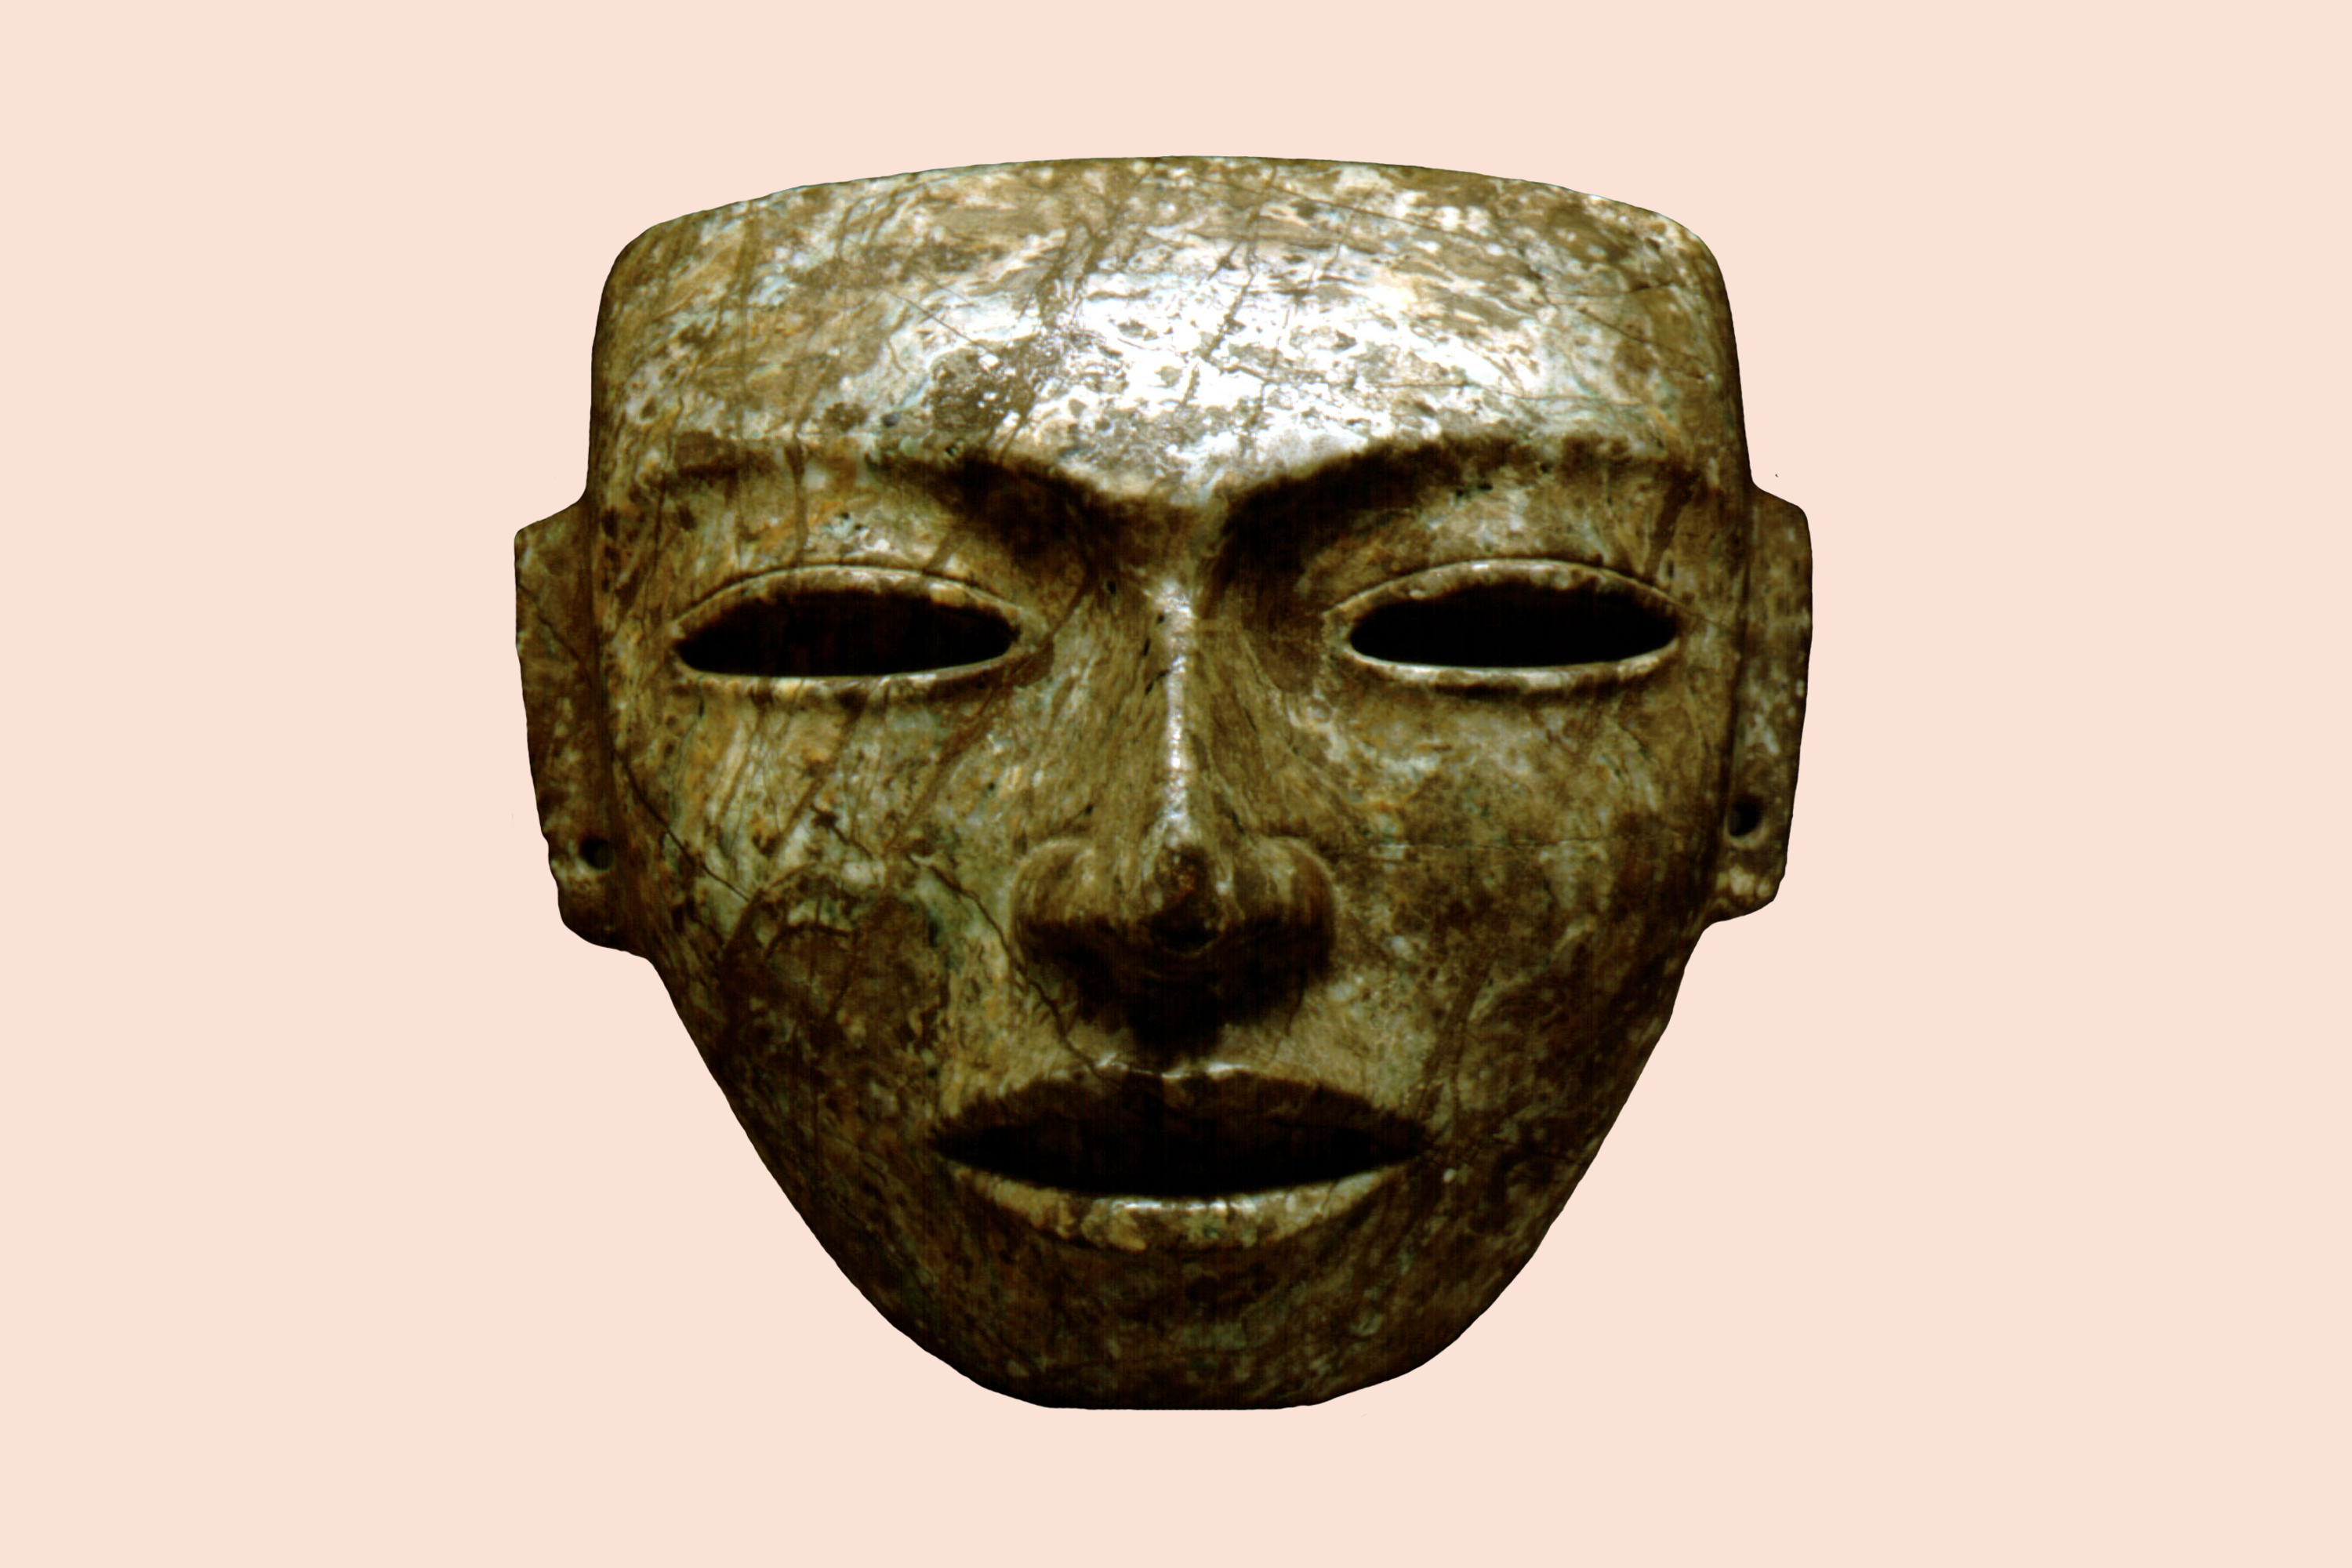 At Teotihuacan, leaders’ faces often were depicted wearing masks. In this city, the individual identity of leaders was not emphasized.